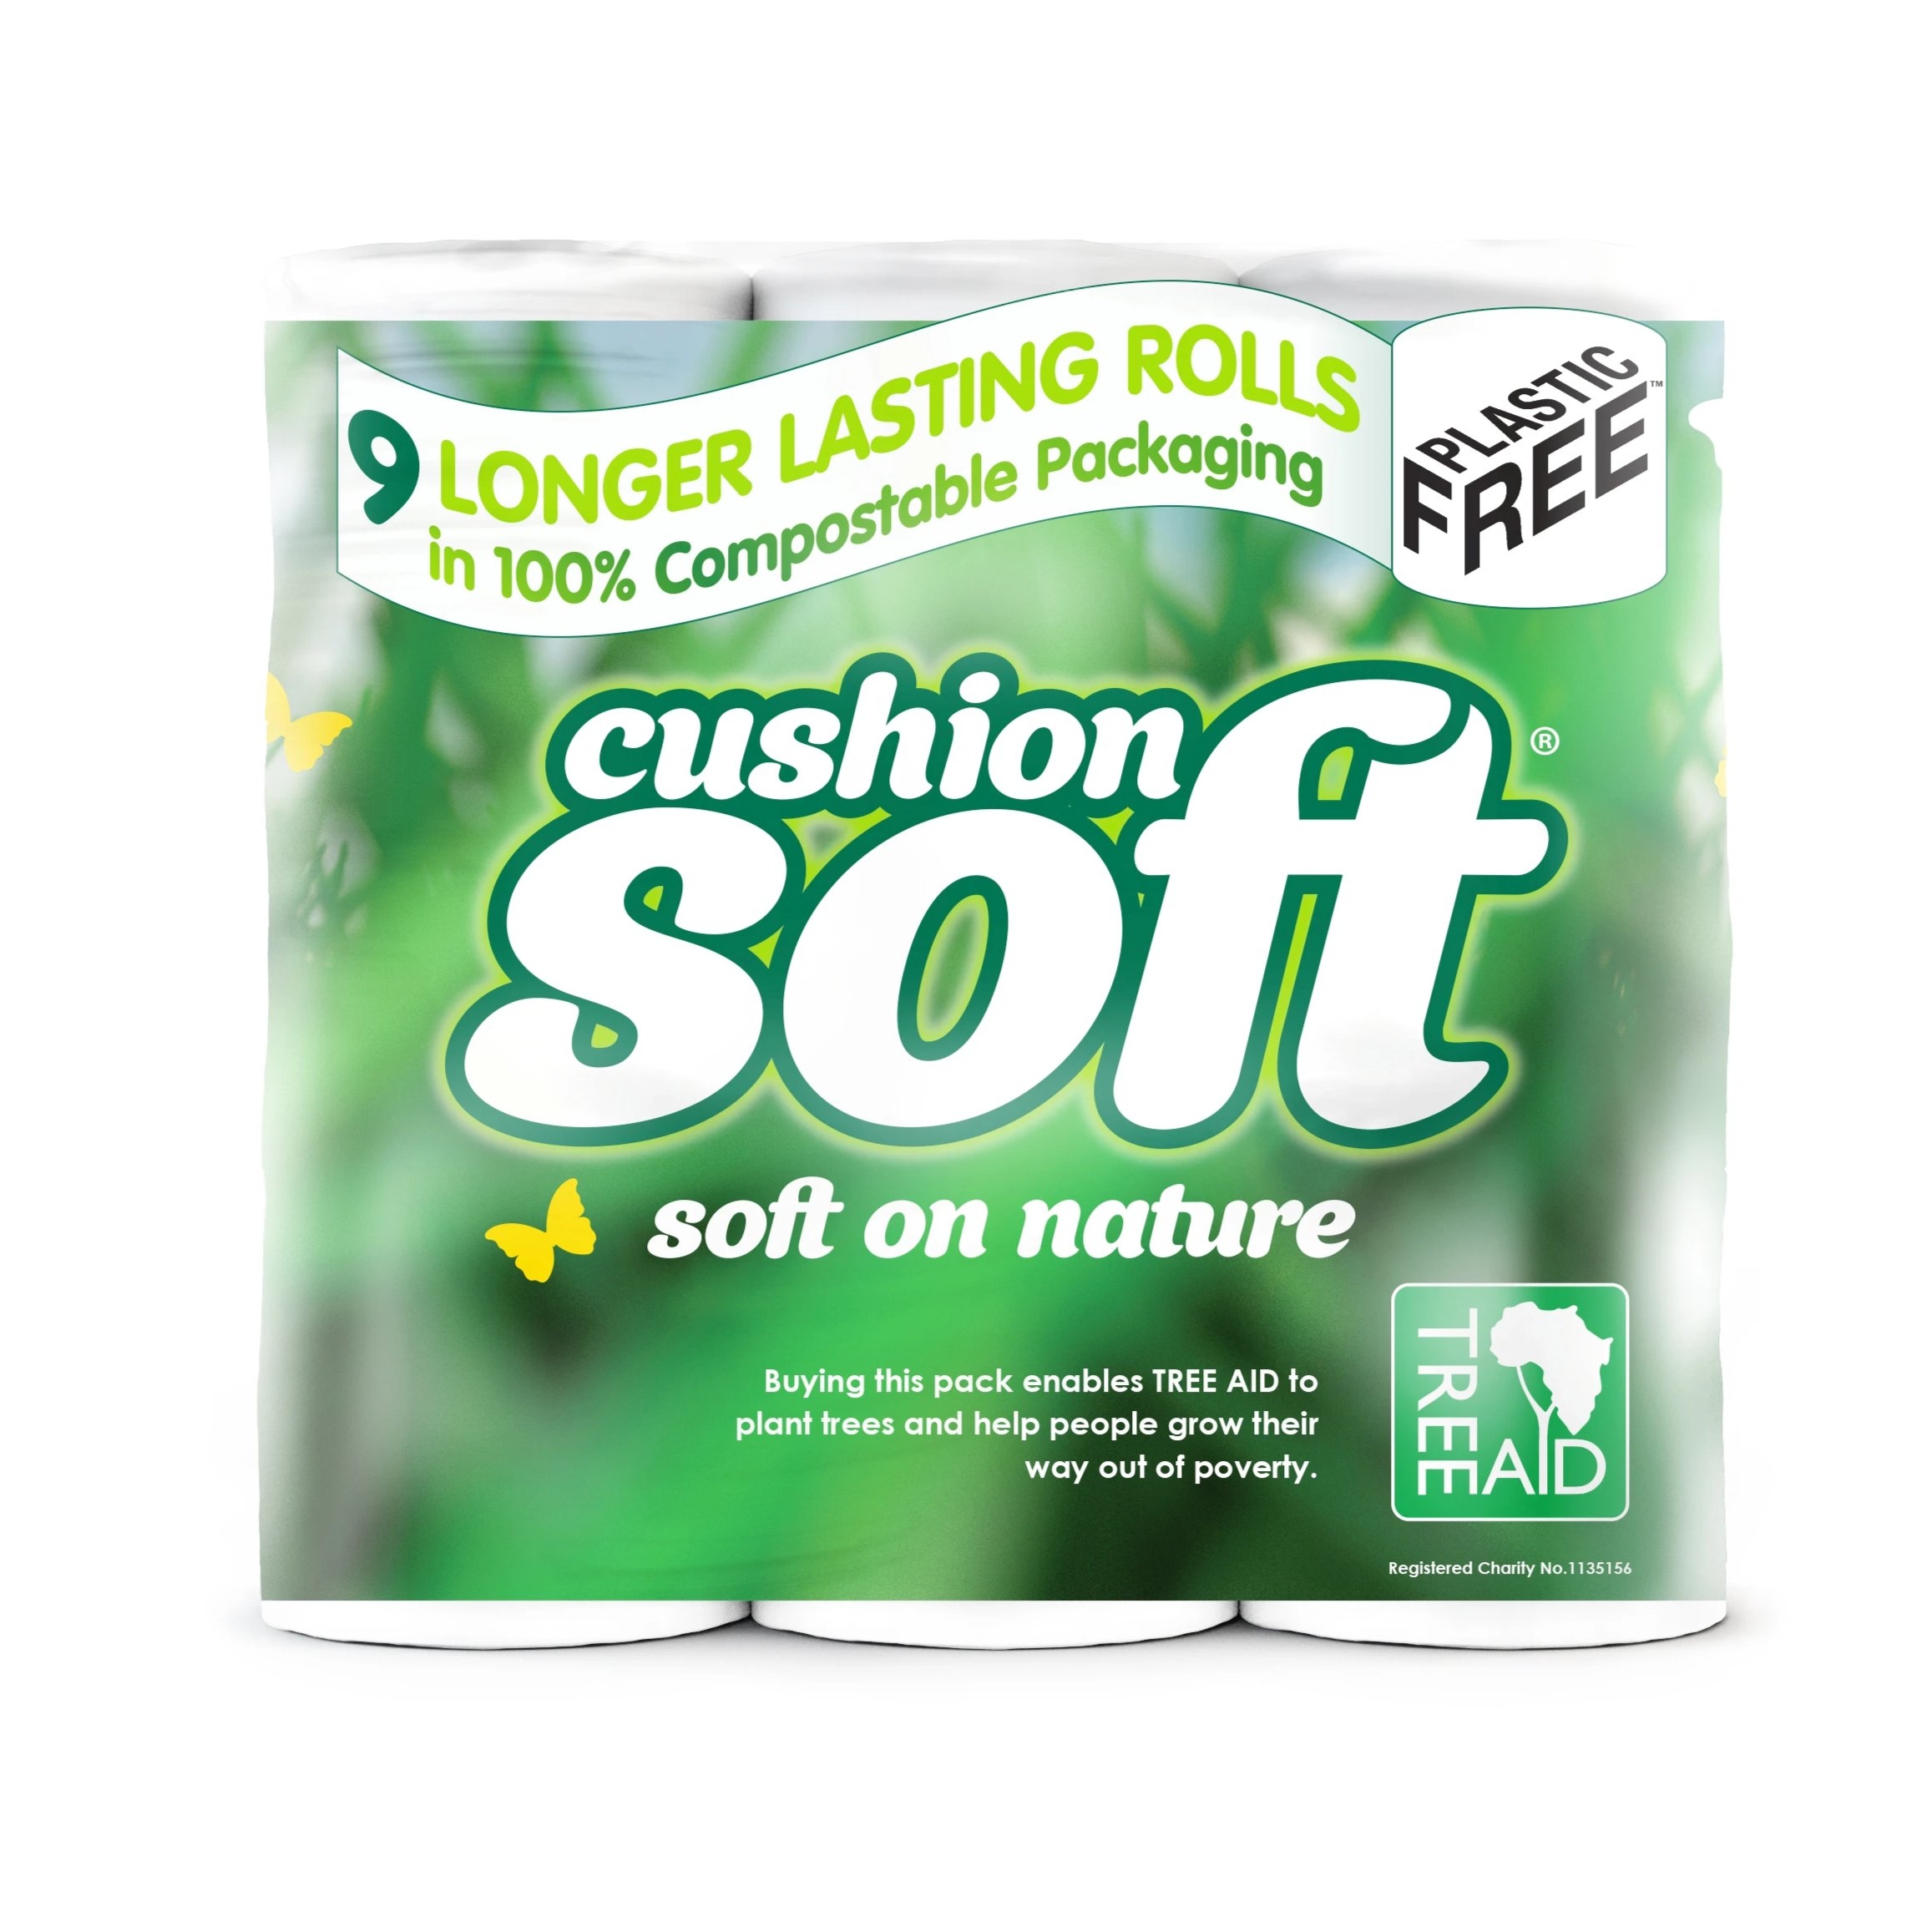 Cushion Soft Toilet Rolls (9-Pack) – “Soft on Nature”